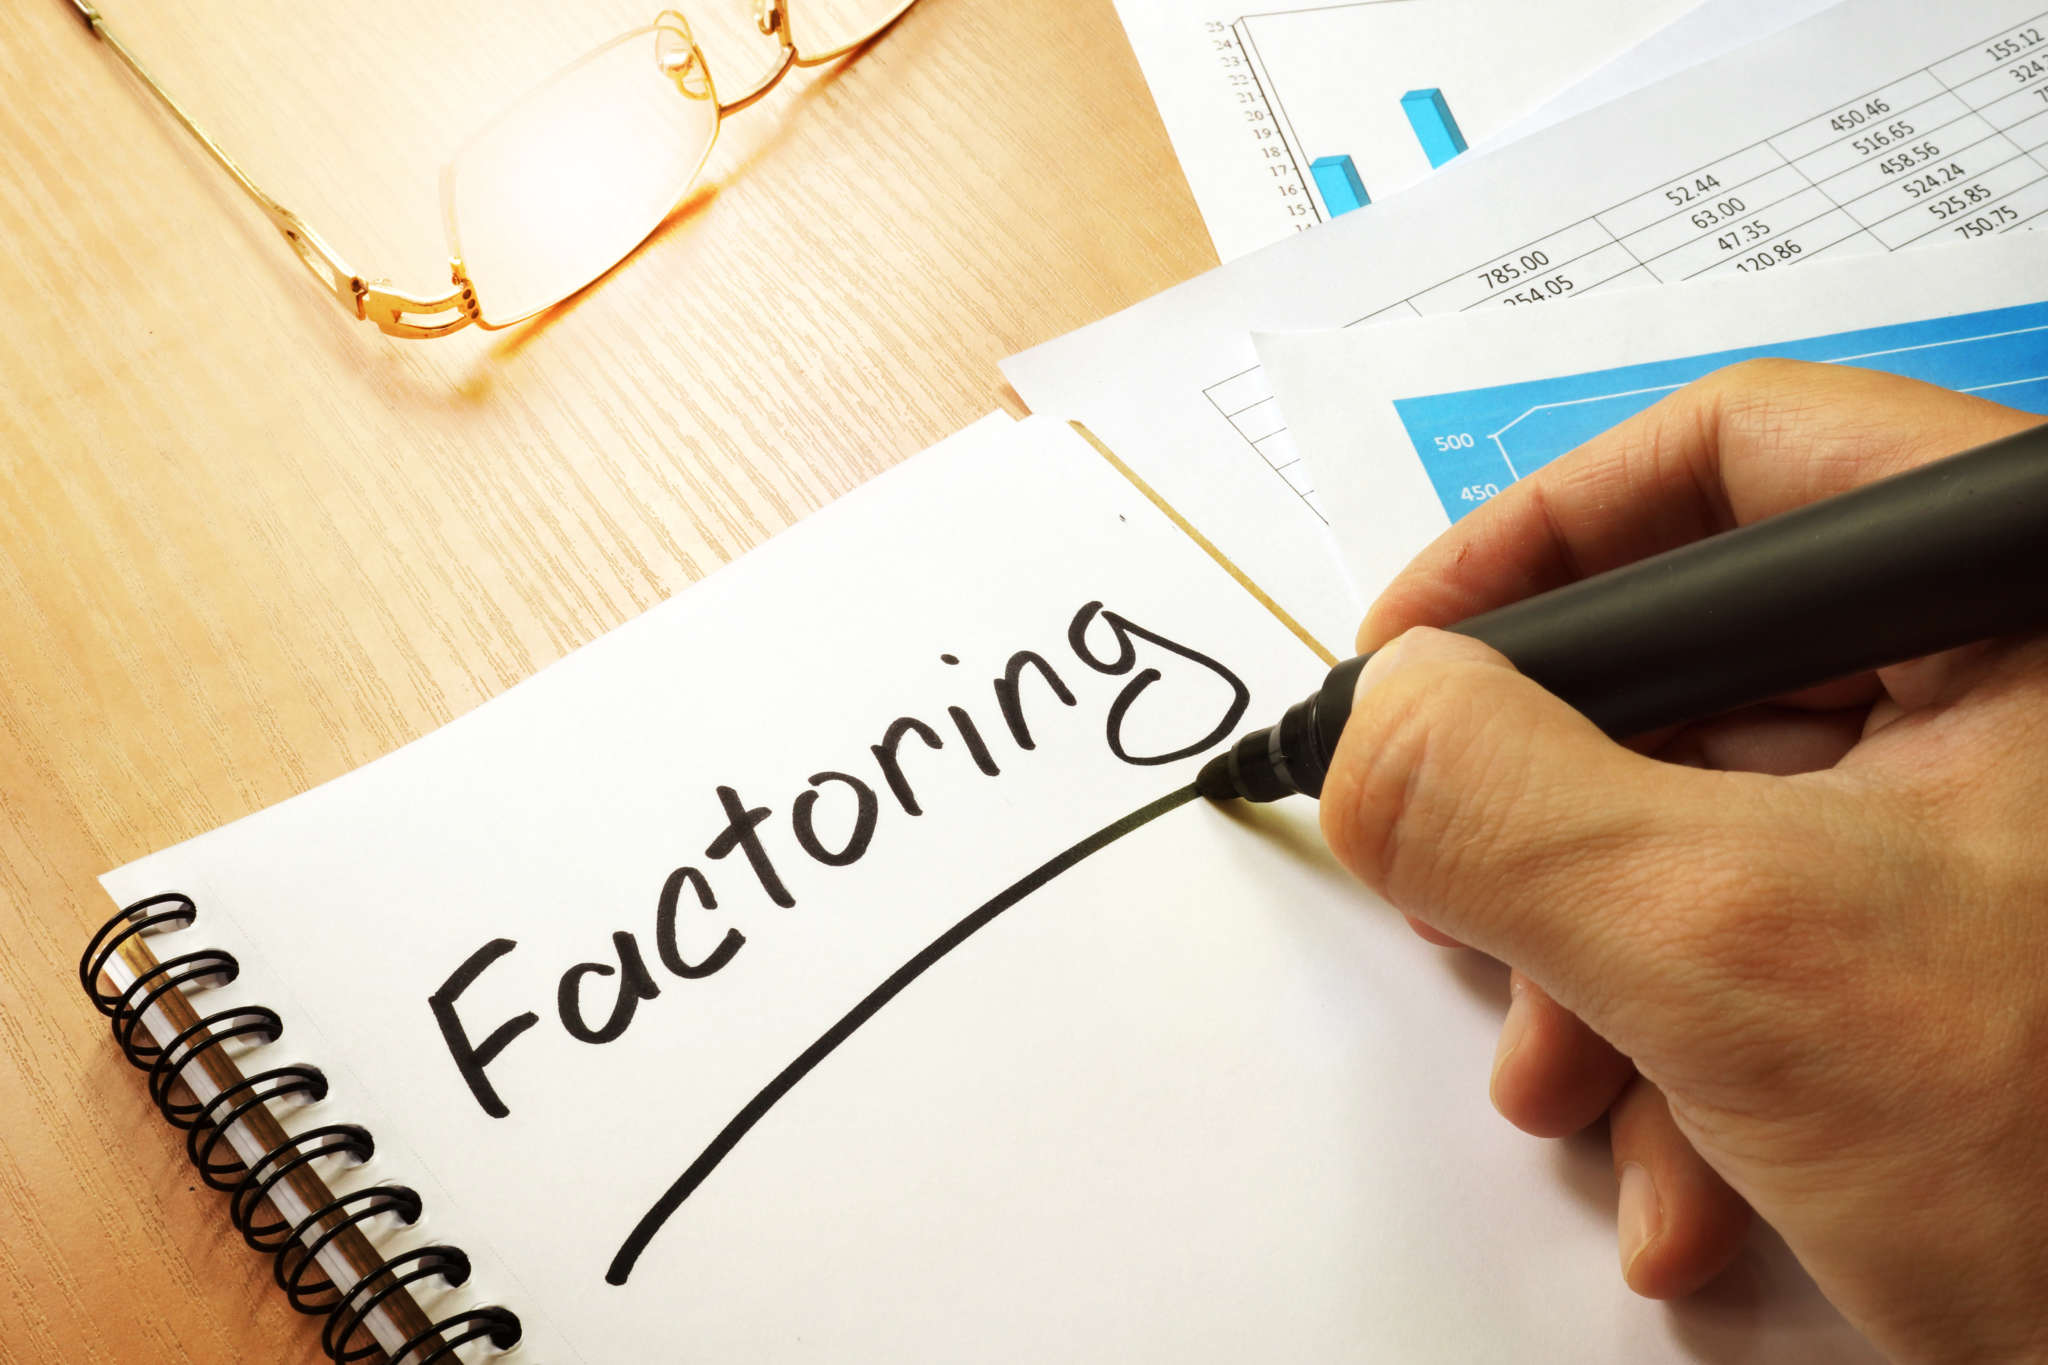 Debt Factoring - The Pros and Cons for Your Business